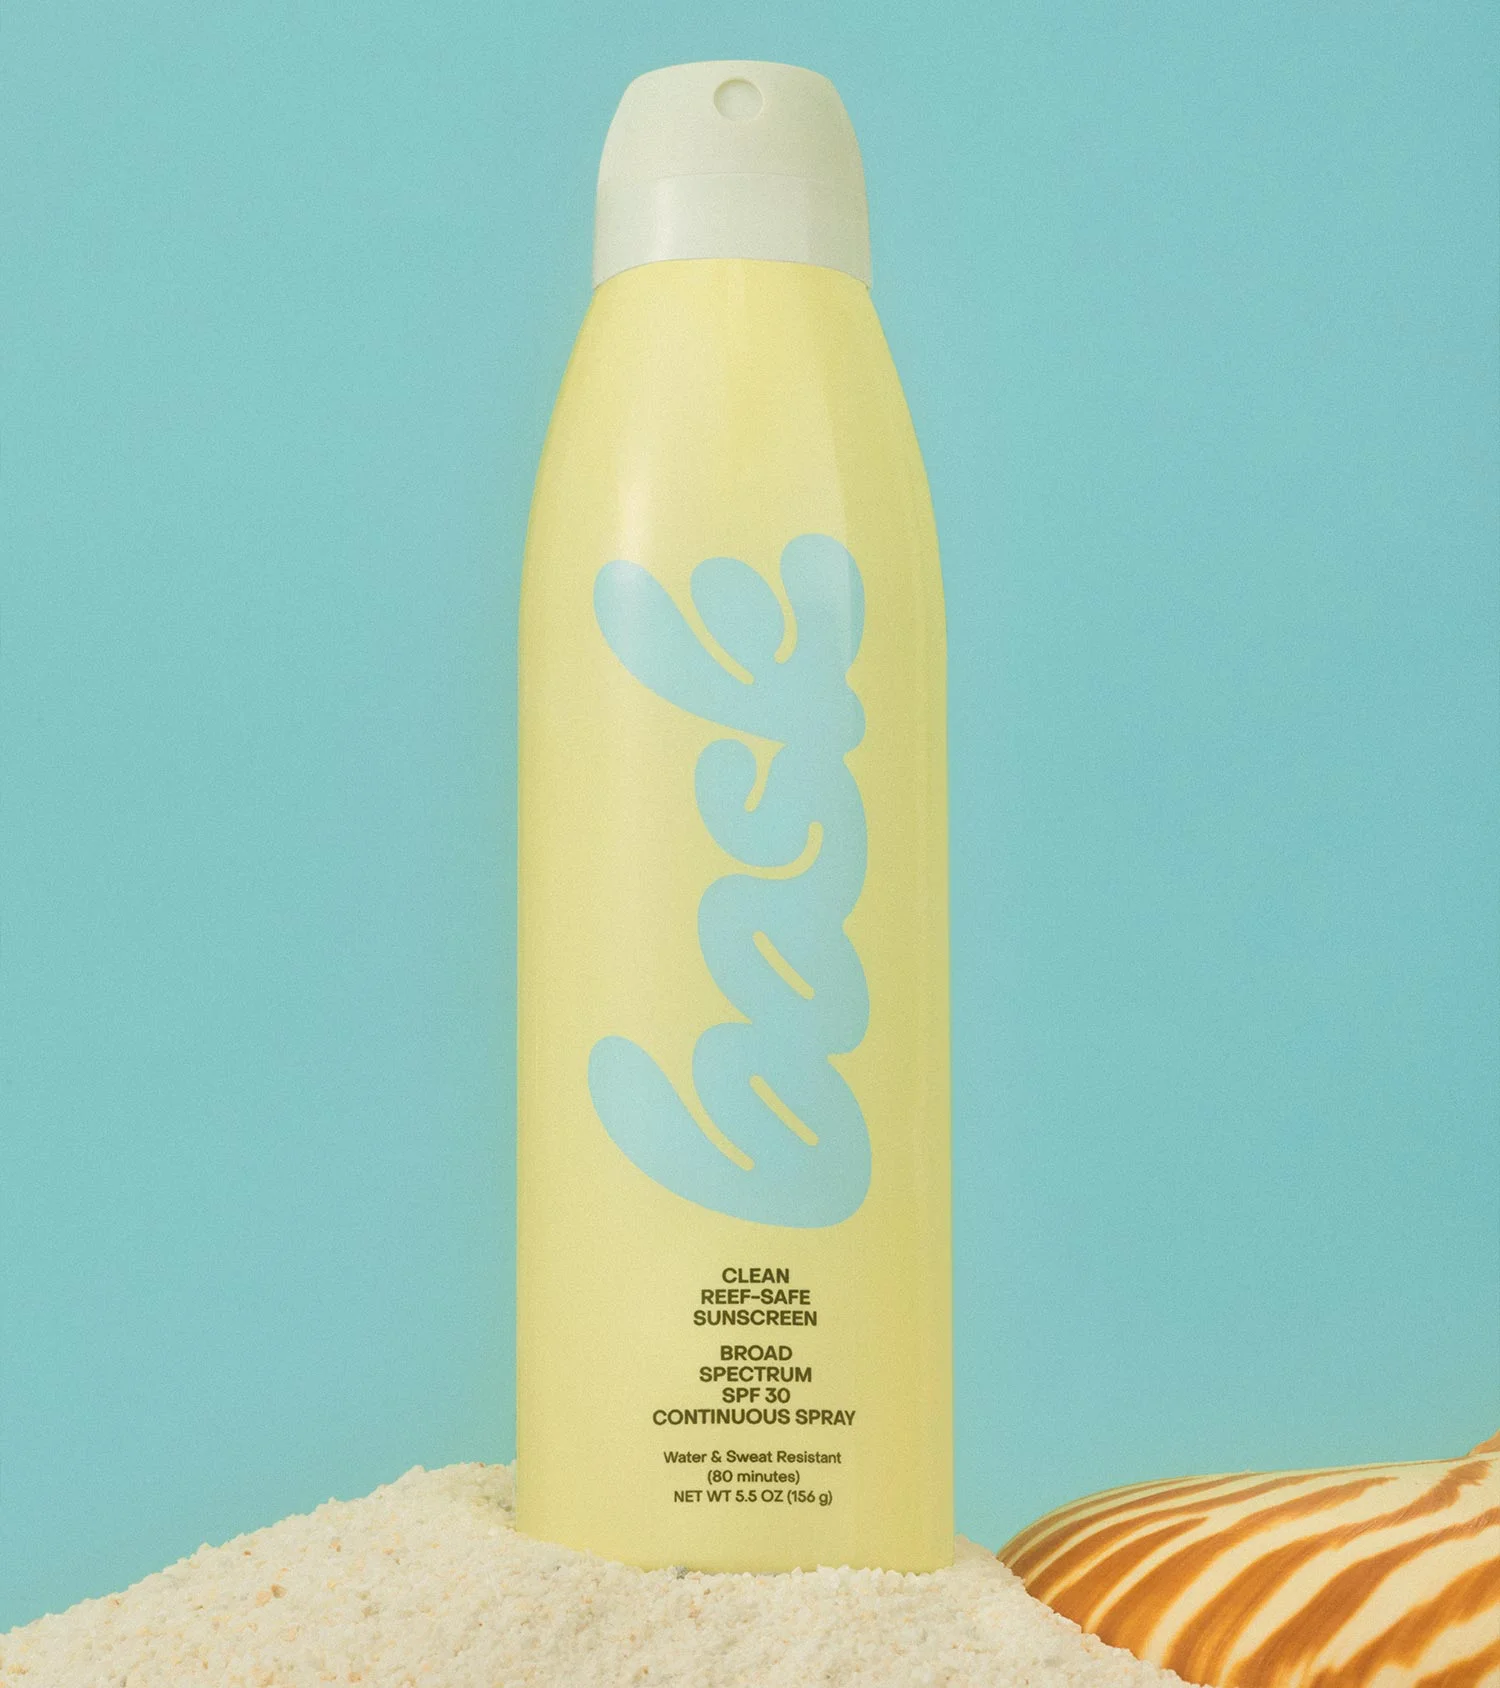 Bask Suncare Yellow Continuous Spray Sunscreen Bottle on Sand with Sea Shell on a Blue Background, Art Direction by RoAndCo